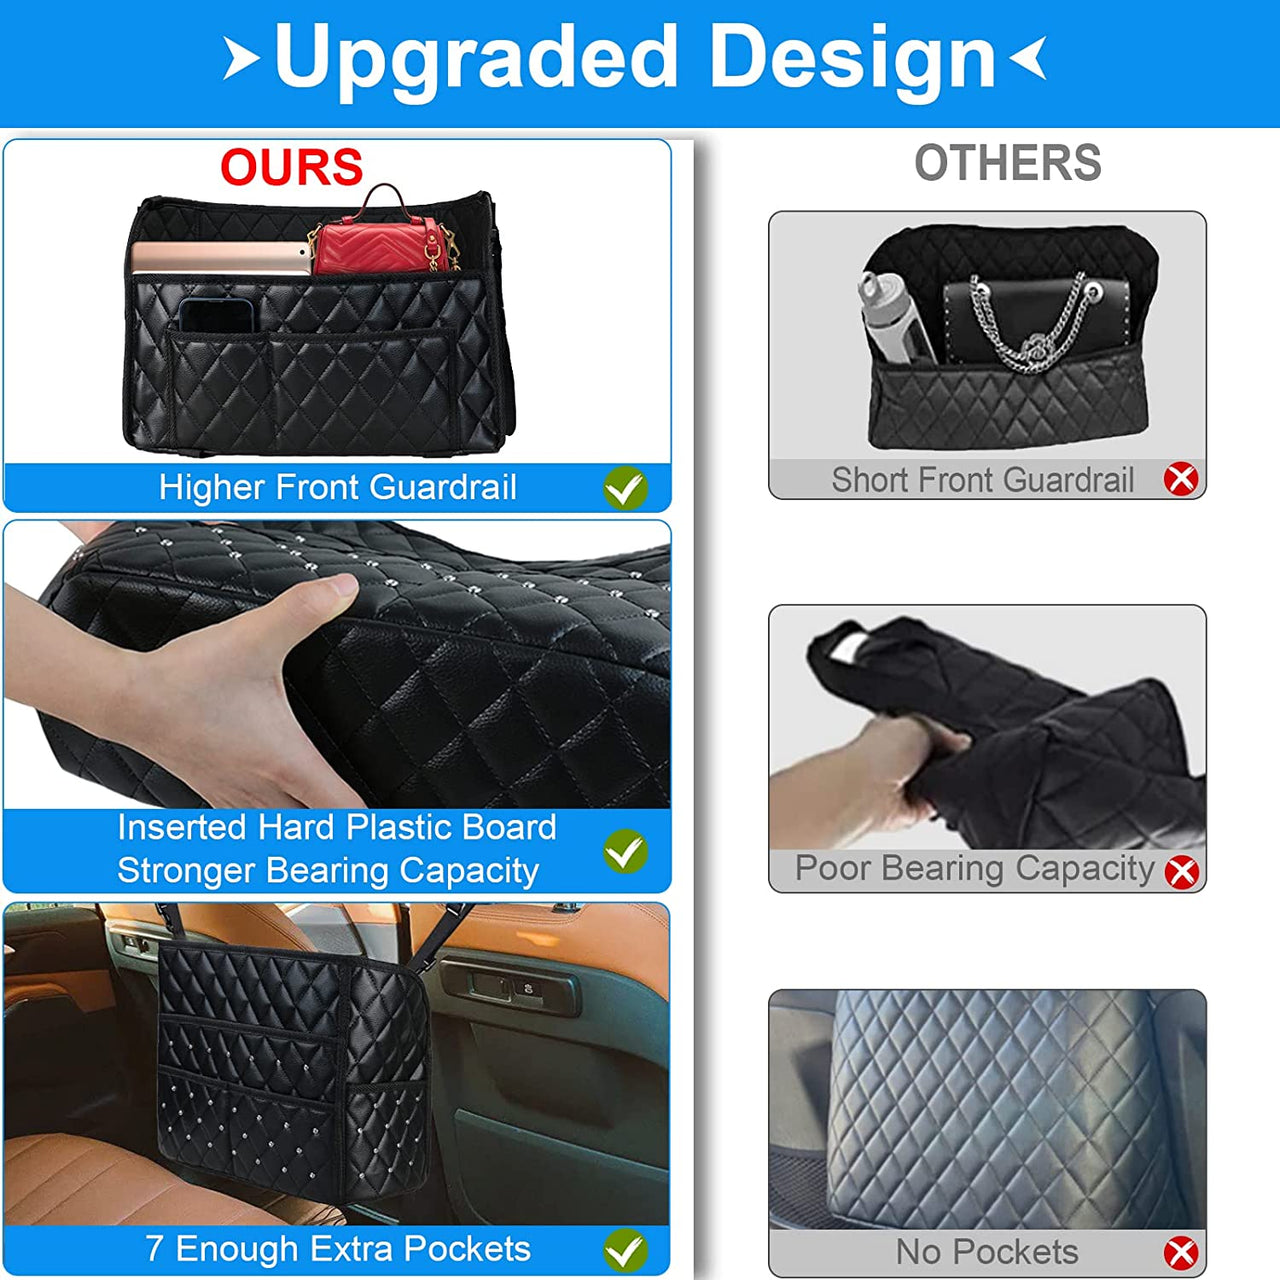 Purse Holder for Cars,Car Purse Handbag Holder Between Seat,PU Leather Car Purse Holder with 7 Extra Pocket,Large Capacity Car Net Bag Organizer Barrier of Back Seat Dog Kids Seat Storage With Diamond, Compatible with All Cars